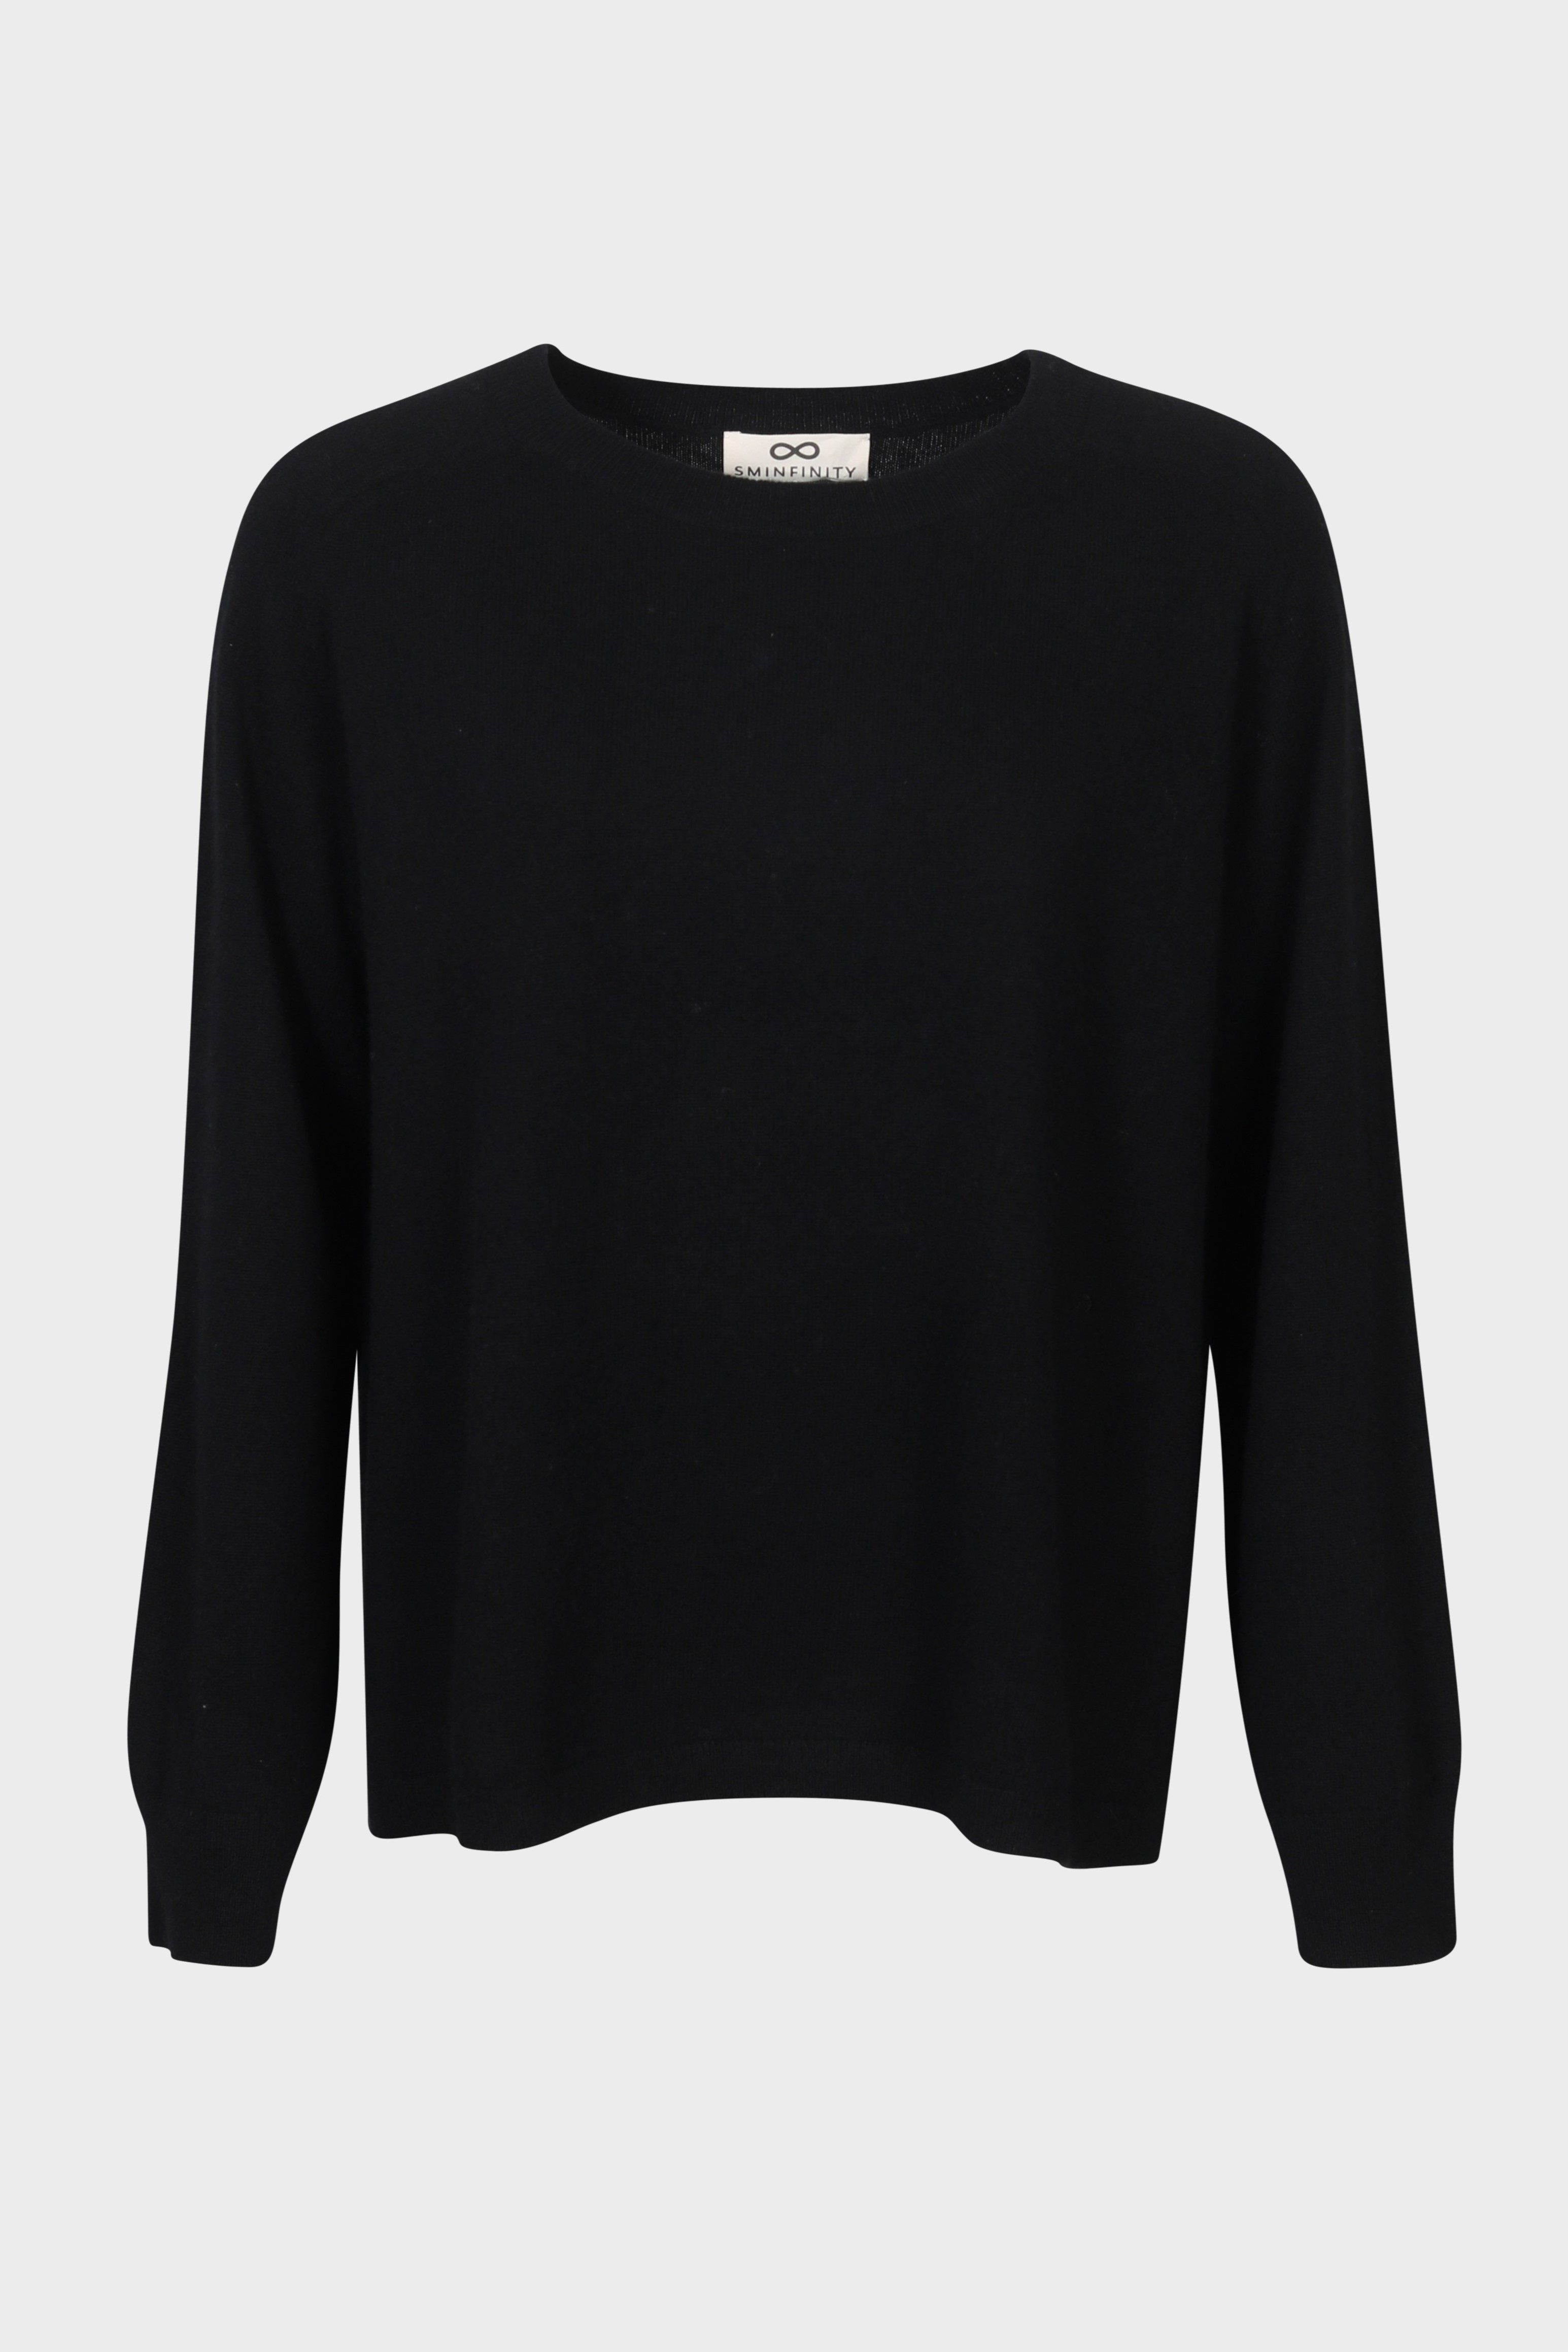 SMINFINITY Chilly Knit Pullover in Black